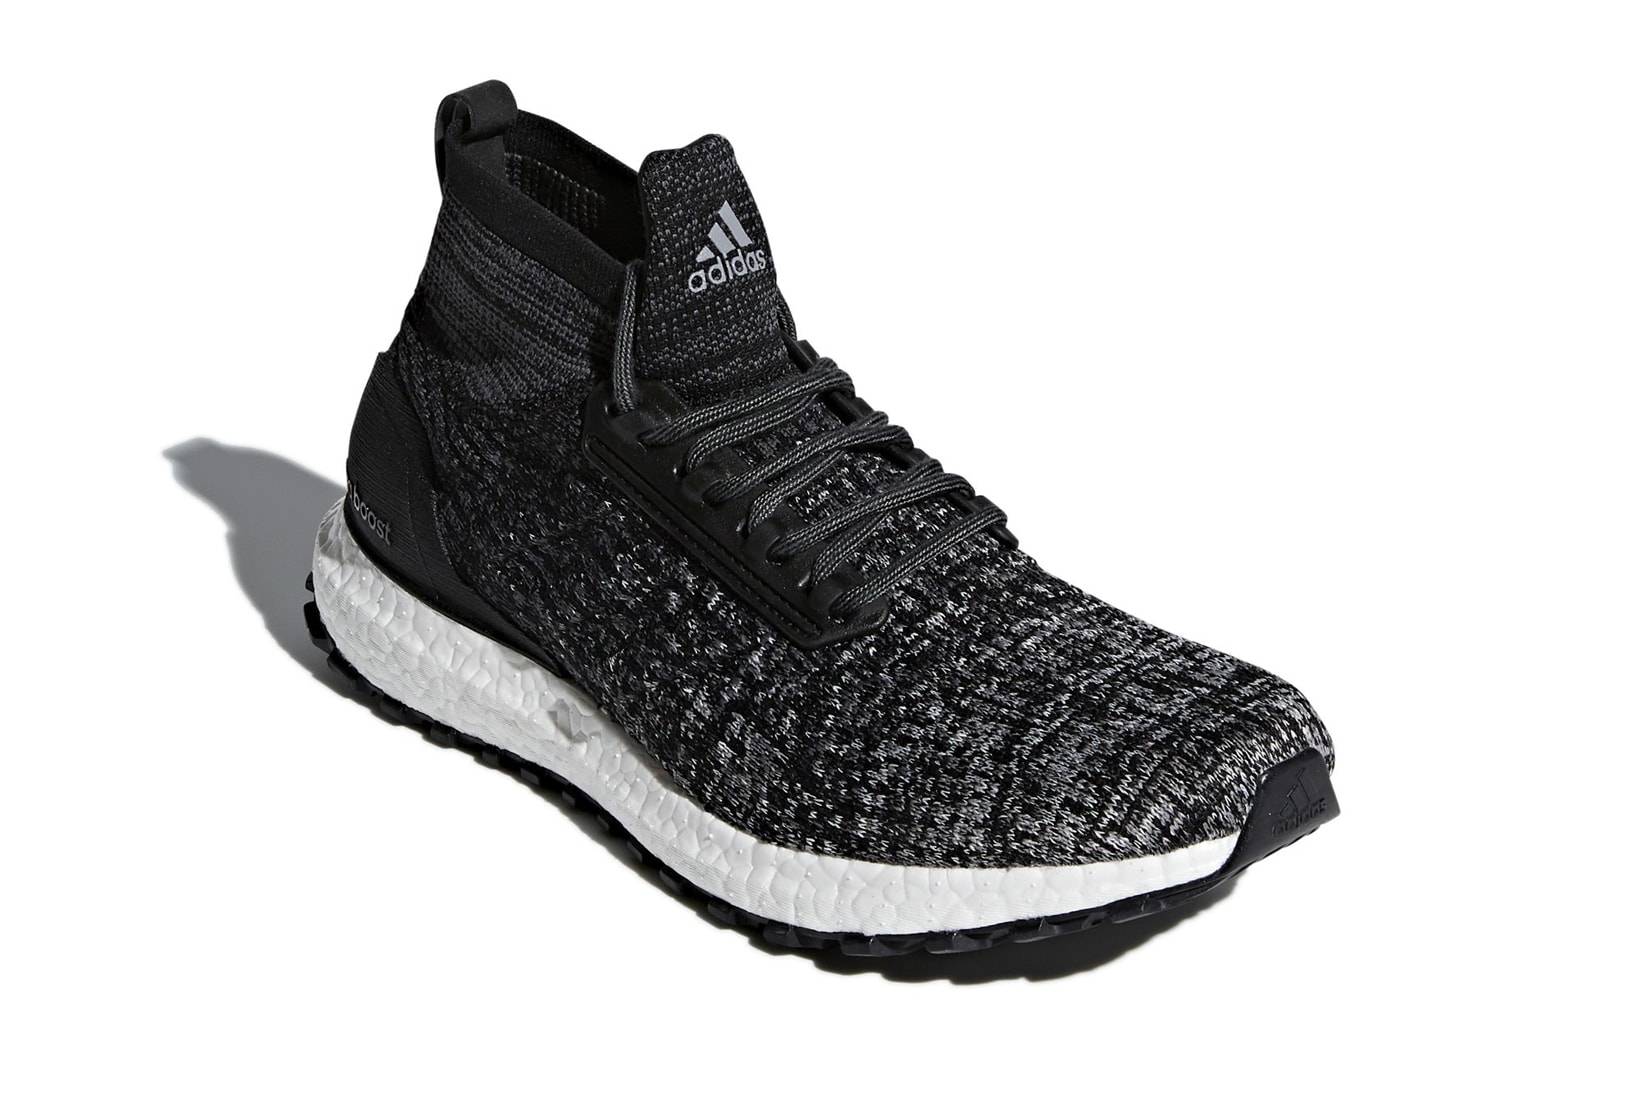 adidas Reigning Champ UltraBOOST Mid ATR Originals collaboration drop release date info 2018 february 14